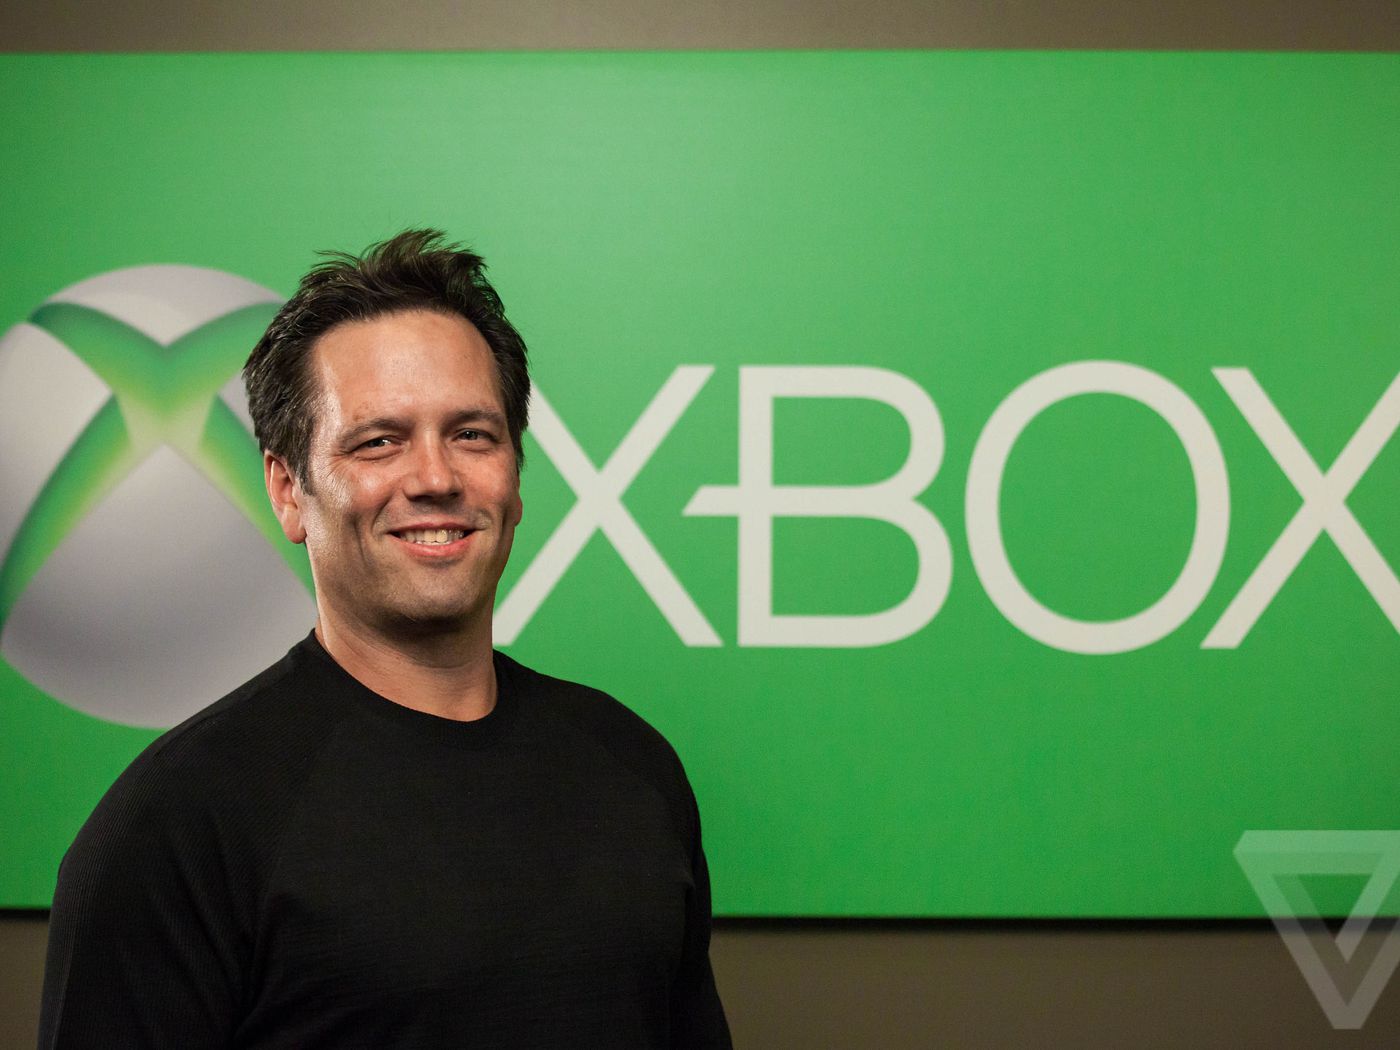 Phil Spencer Denies Plans to Bring Xbox Game Pass to PlayStation